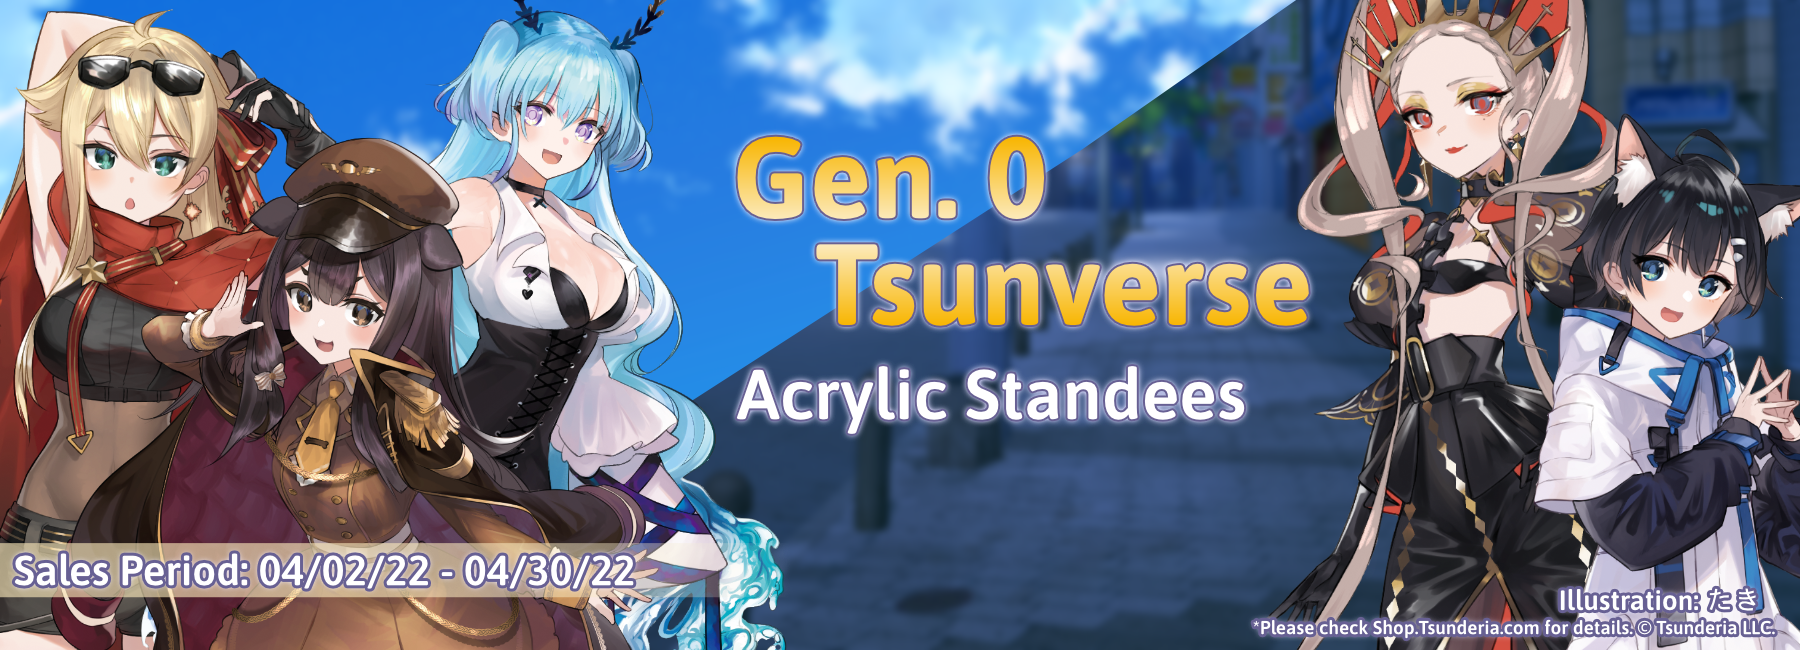 Celebrate Gen. 0 and Tsunverse with a Limited Edition Acrylic Standee! On sale at shop.tsunderia.com!